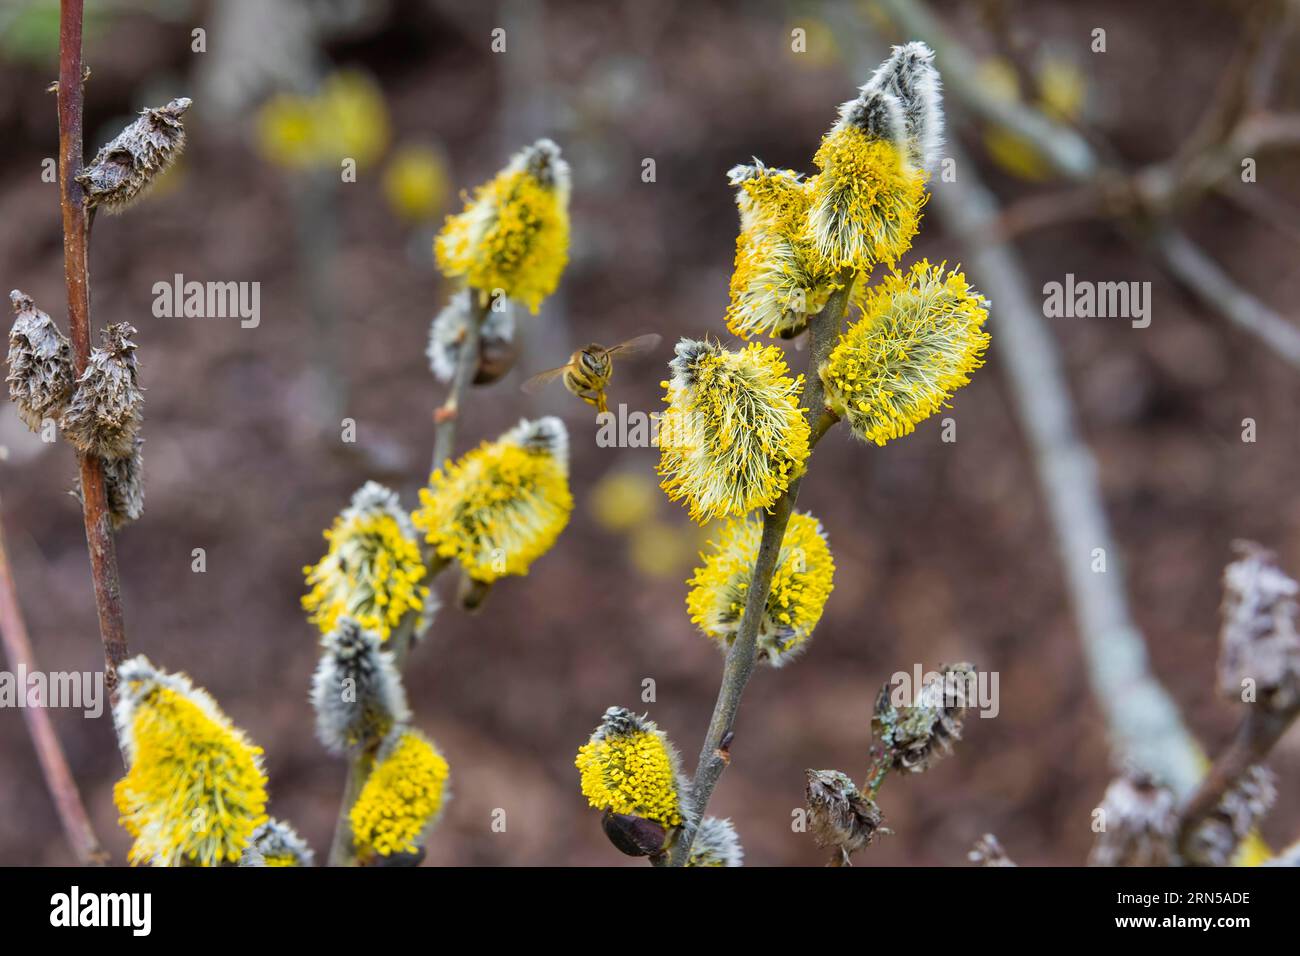 Bees gather nectar on willow catkins in the first warm rays of sunshine Stock Photo